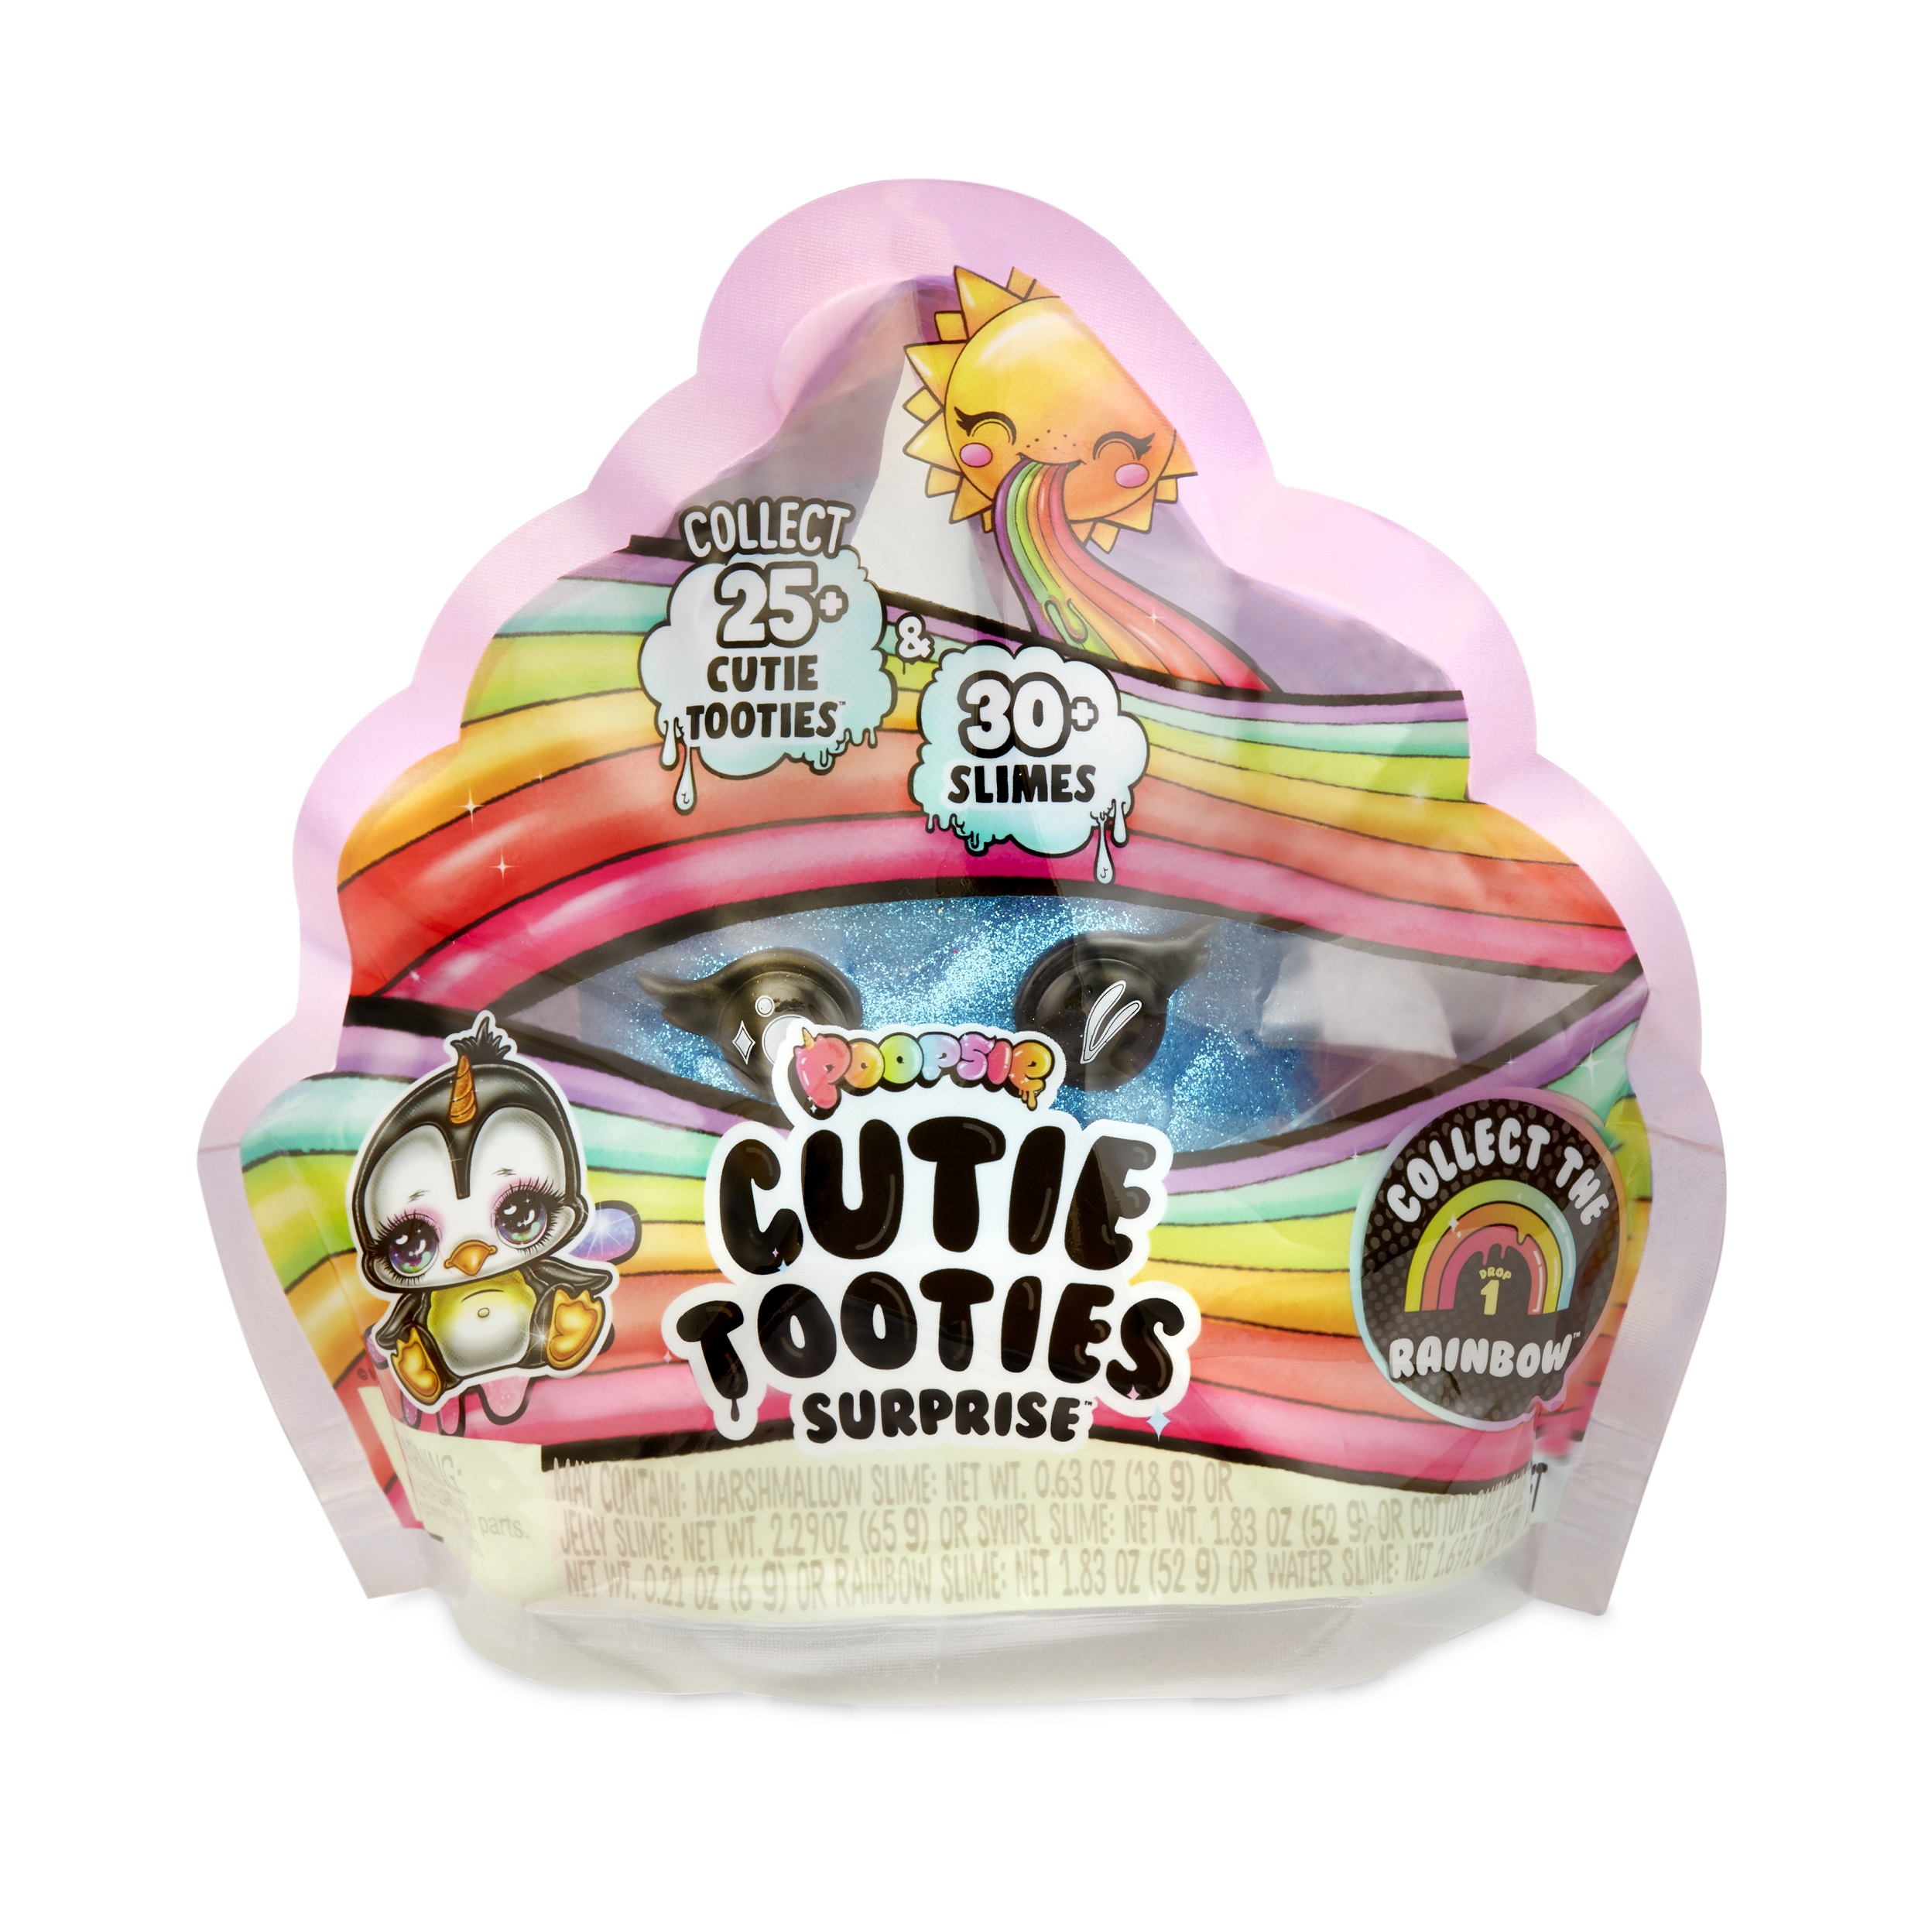 Poopsie Cutie Tooties Surprise Collectible Slime & Mystery Character Wave 2 - image 1 of 6